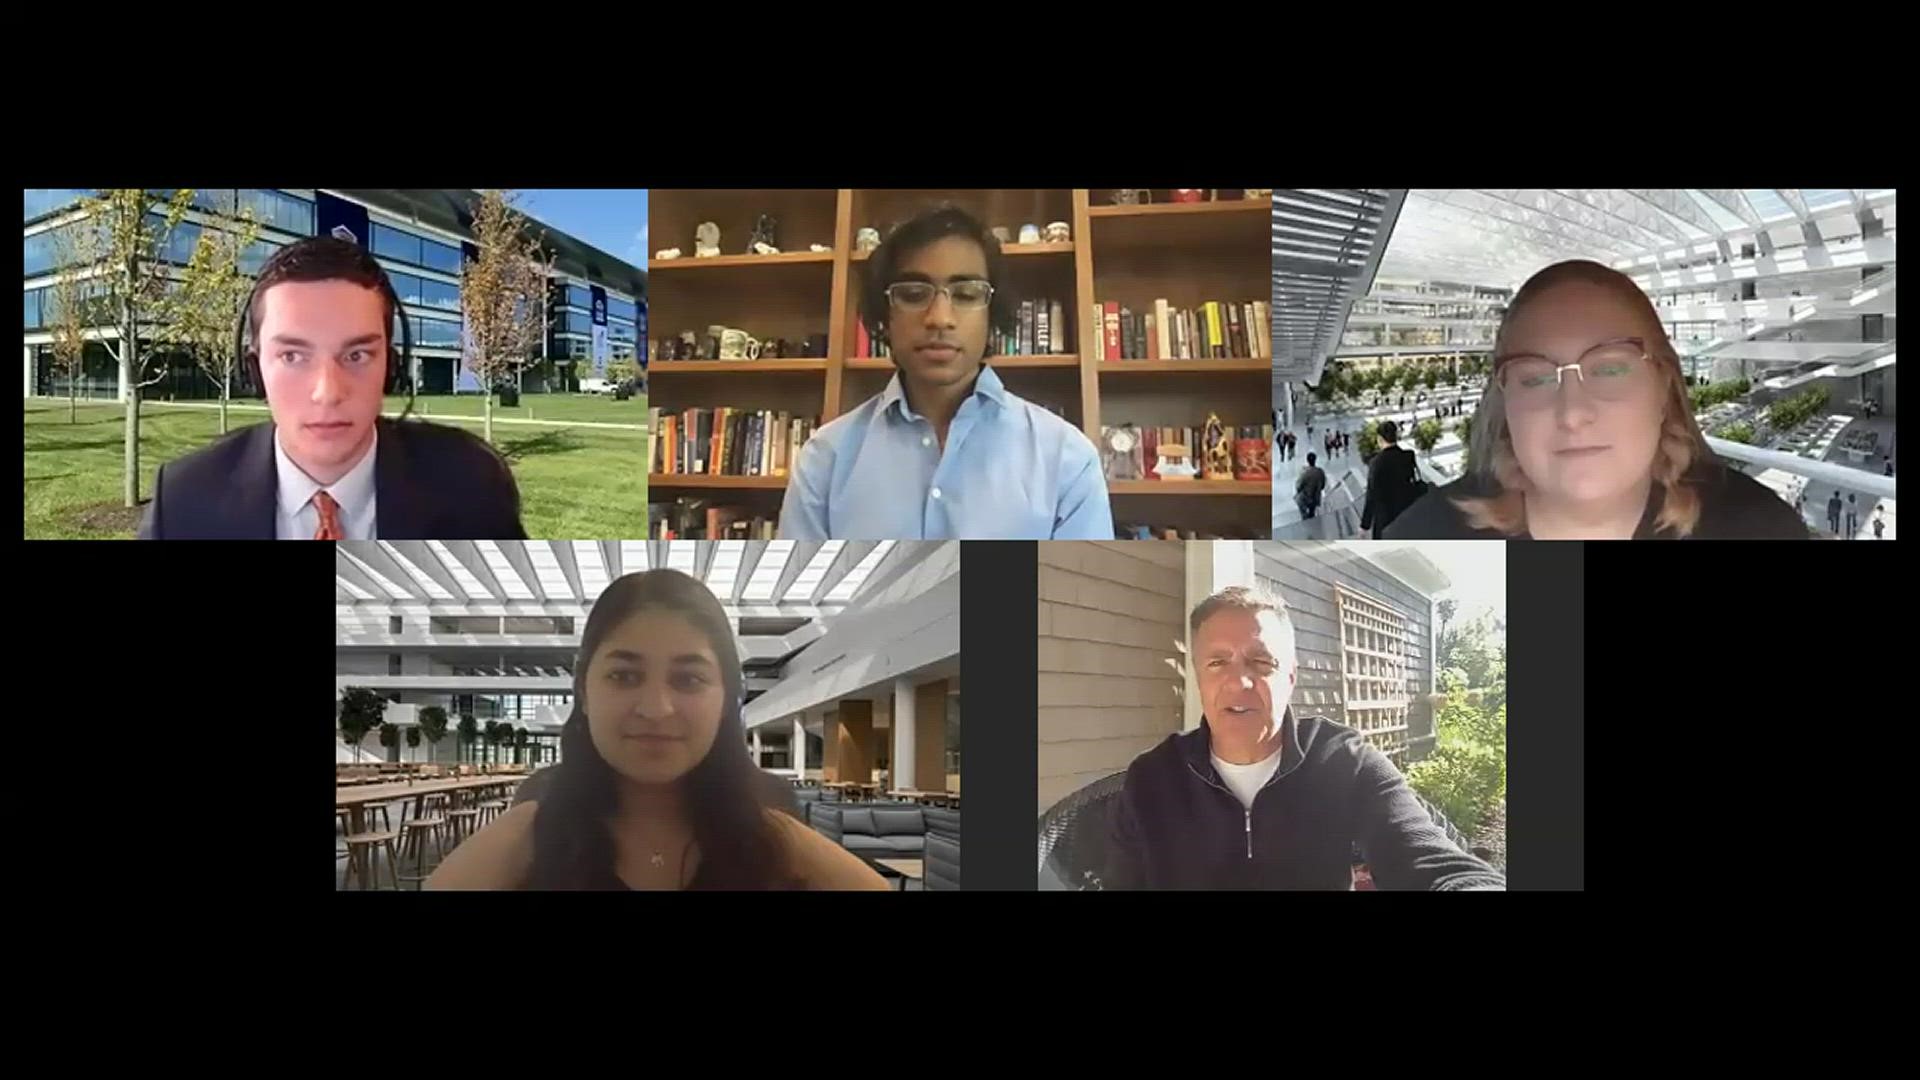 3News’ Jay Crawford talked with four politically engaged Case students today via Zoom to get their thoughts on the debate. What do you think of their reactions?